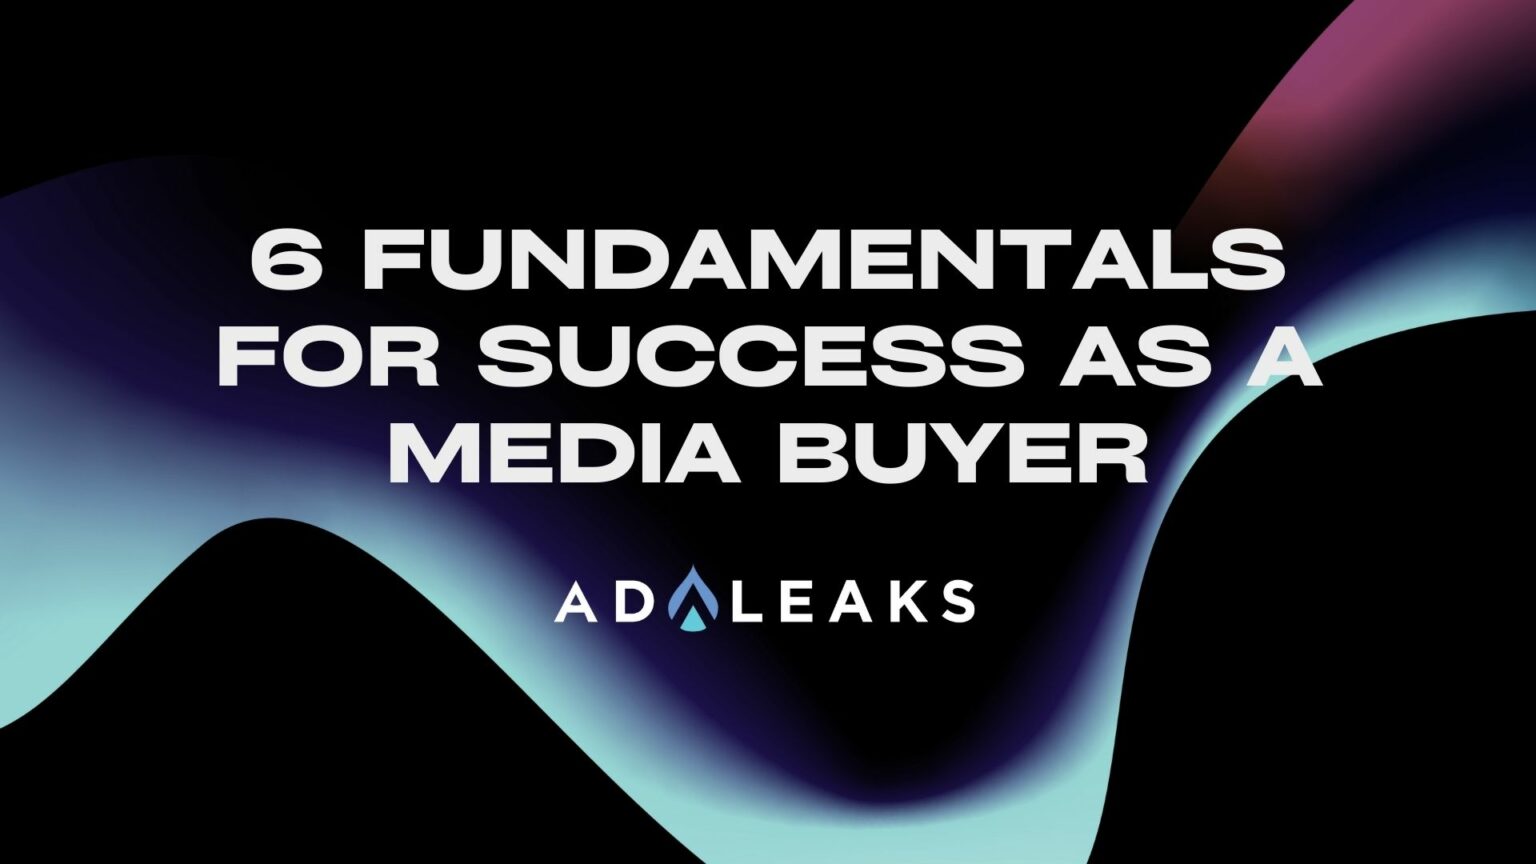 6 Fundamentals for Success as a Media Buyer